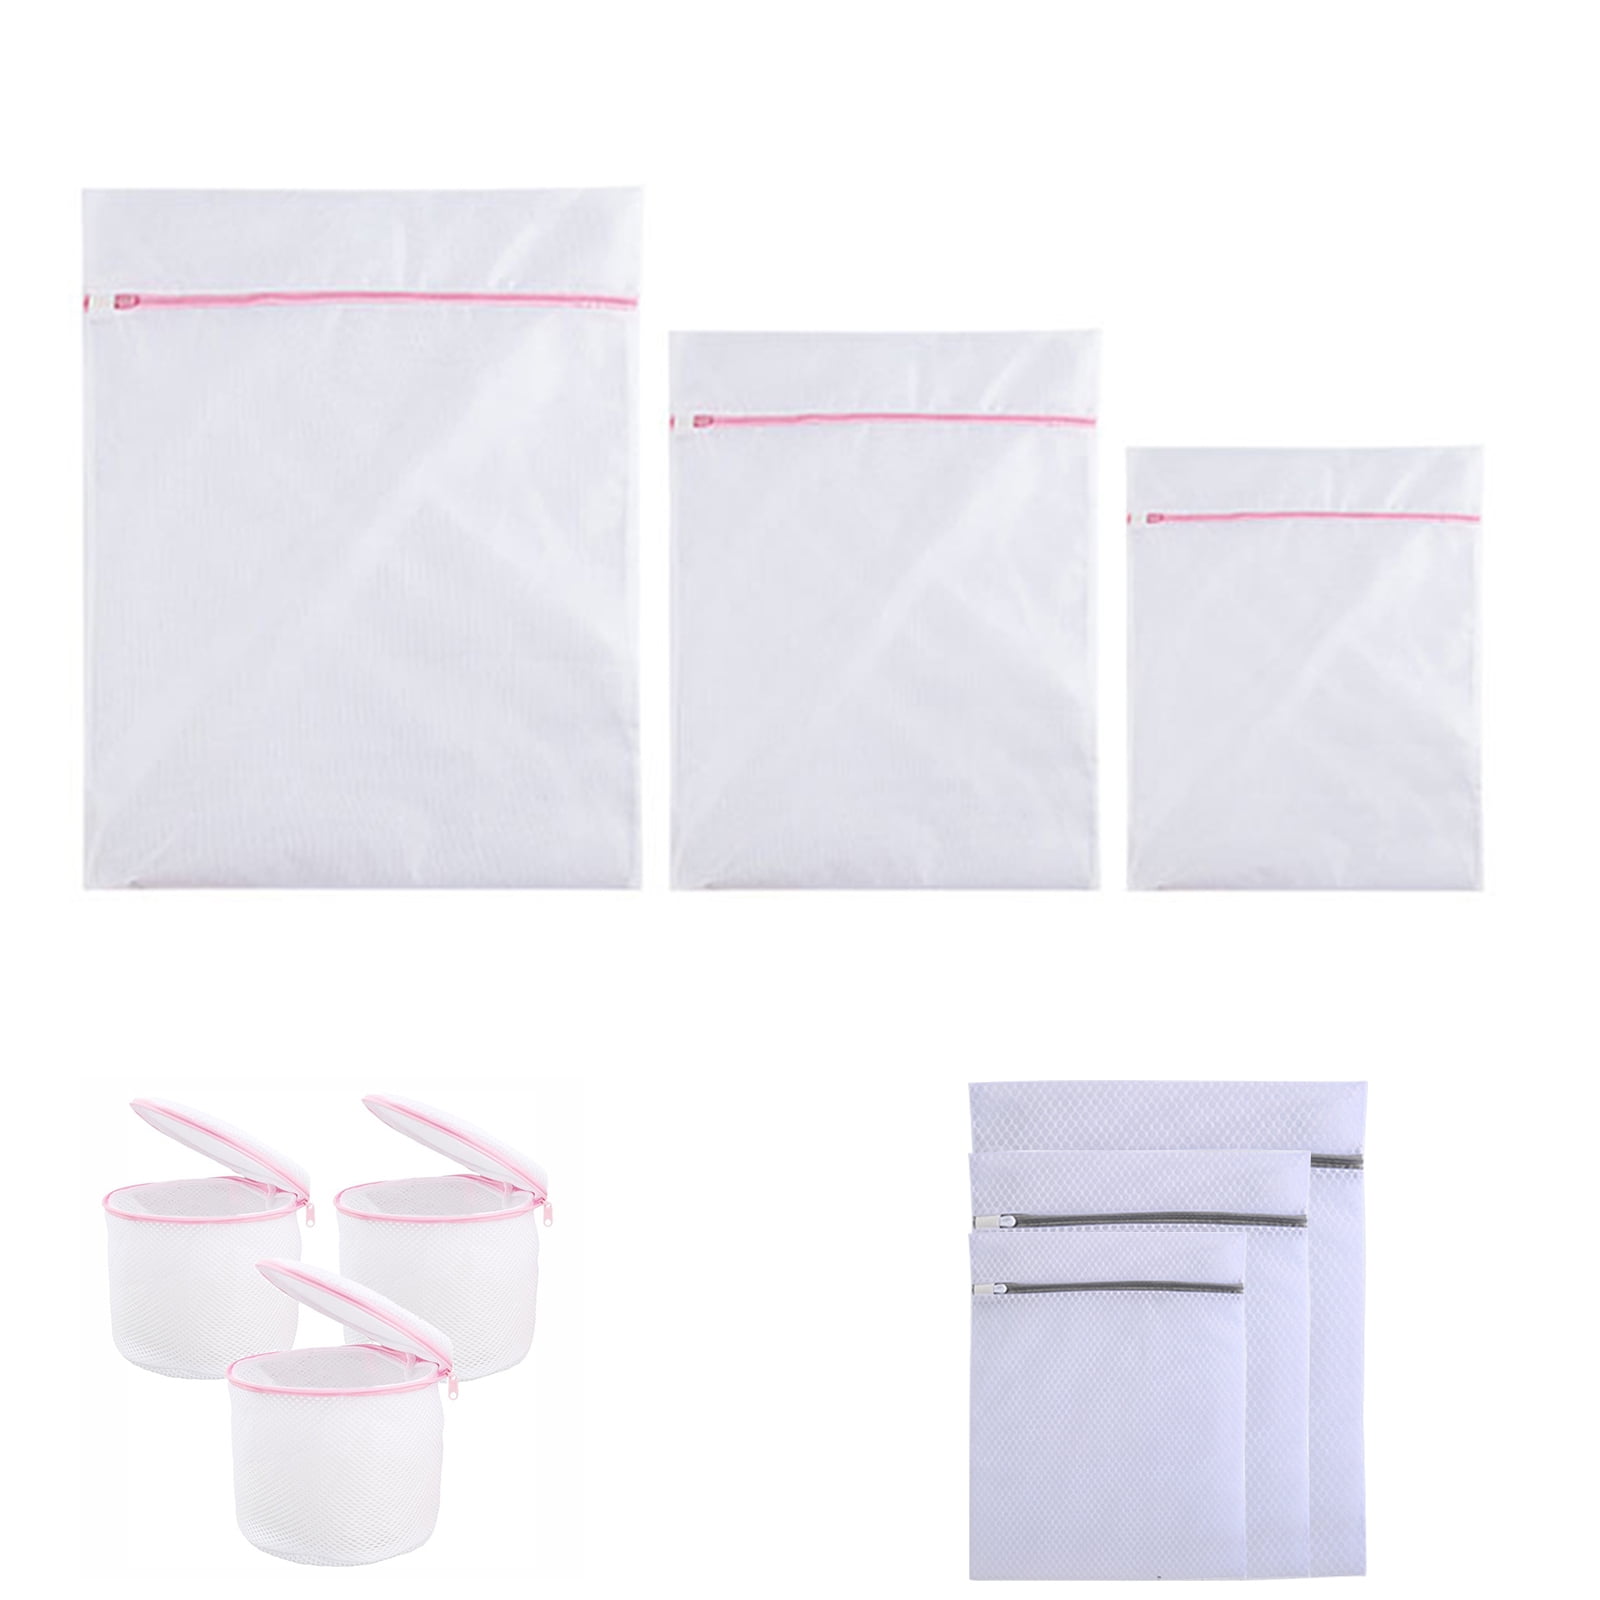 3Pieces Mesh Laundry Bag with zip BagsSocks Lingerie Saver Net Wash Bag  Pouch For